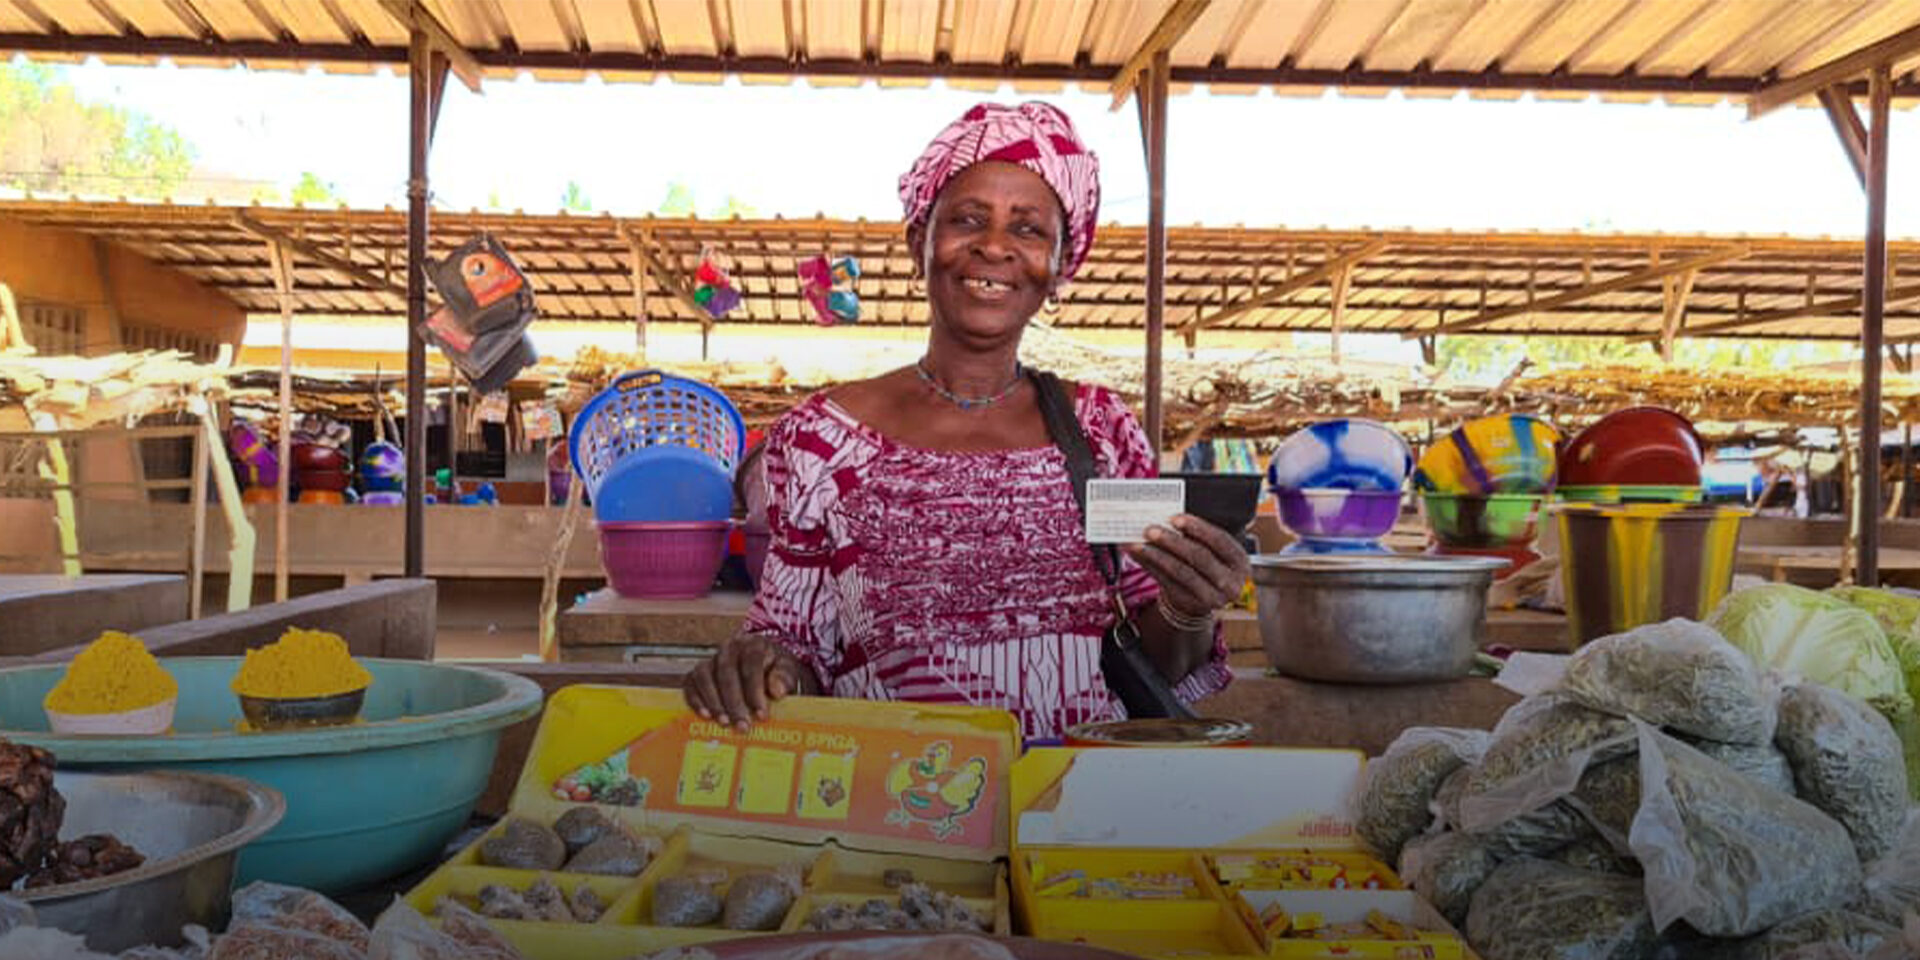 A woman minding a stall selling herbs and spices. She is smiling and holding up a card.